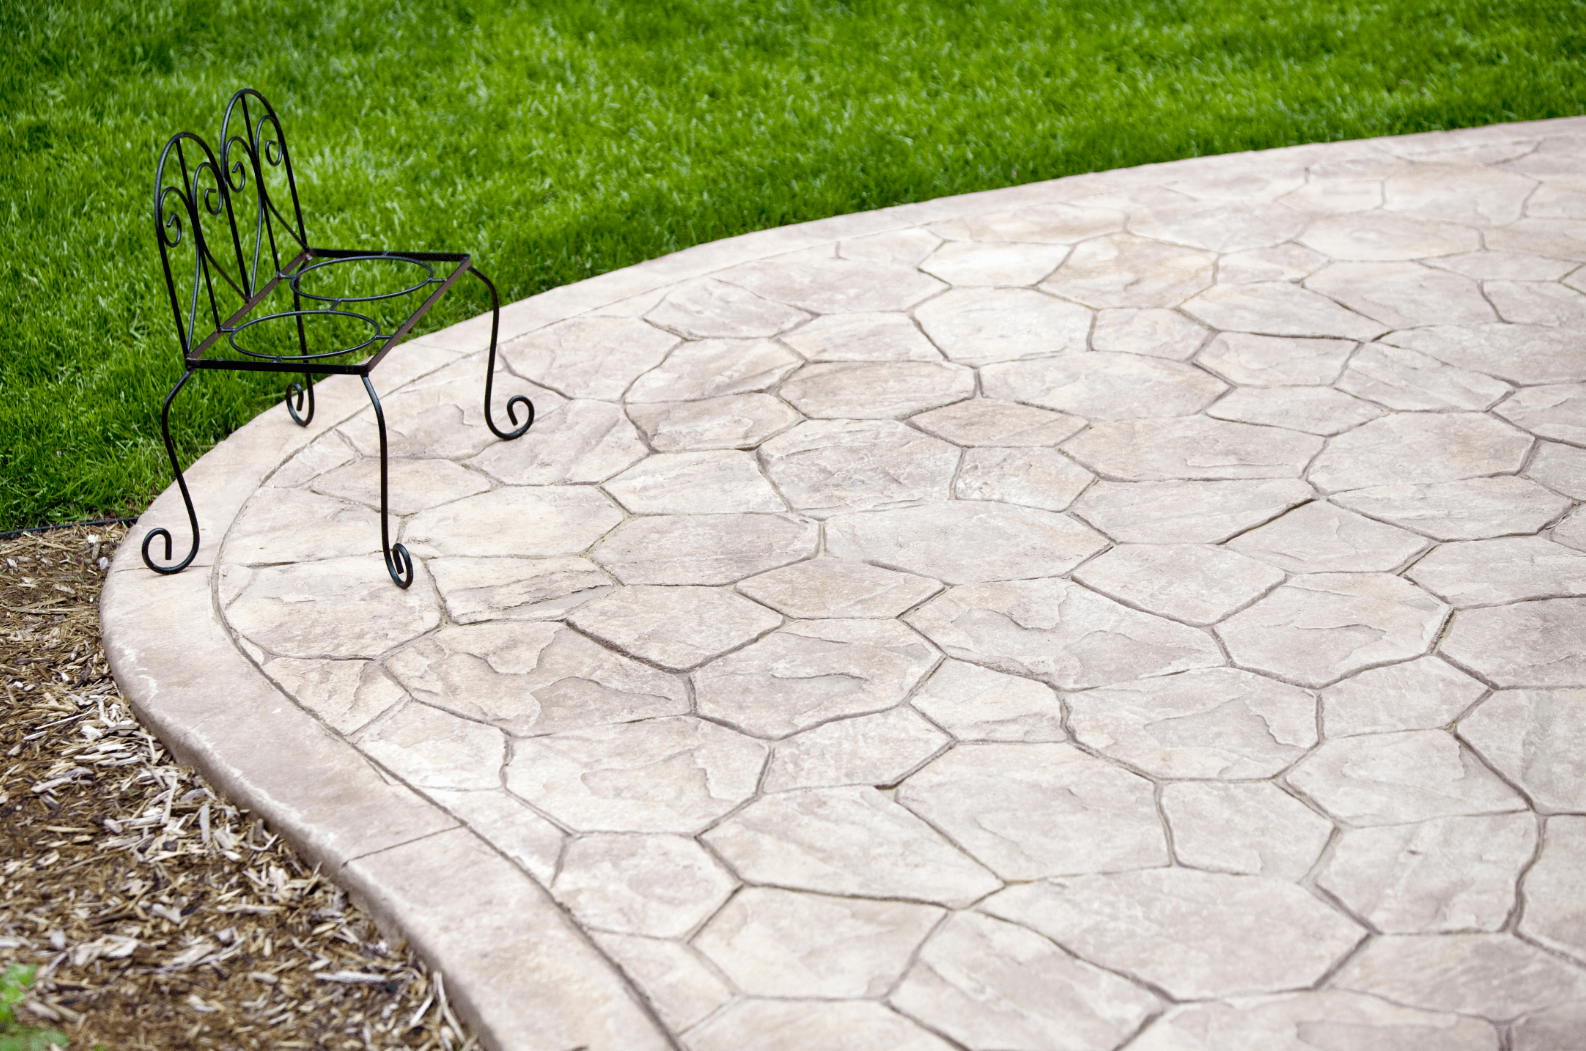 This is a picture of a stamped concrete patio at the edge of some lawn in a backyard.  The stamped concrete has an attractive circular border.